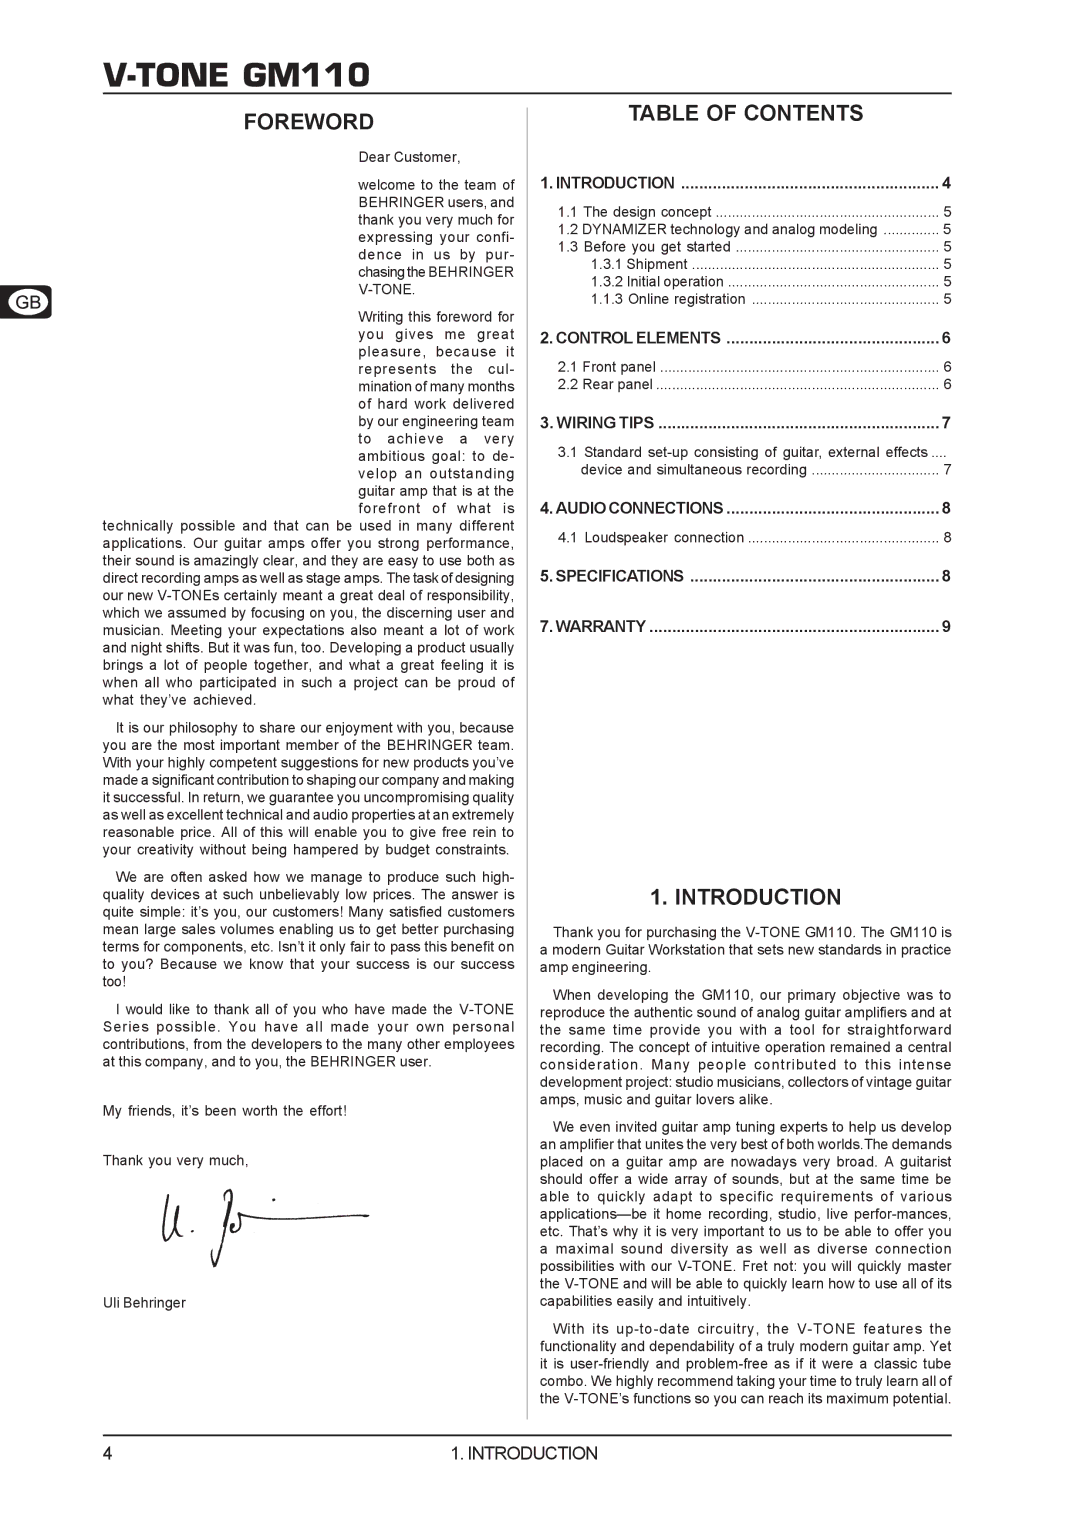 Behringer V-TONE GM110 user manual Foreword, Table of Contents, Introduction 